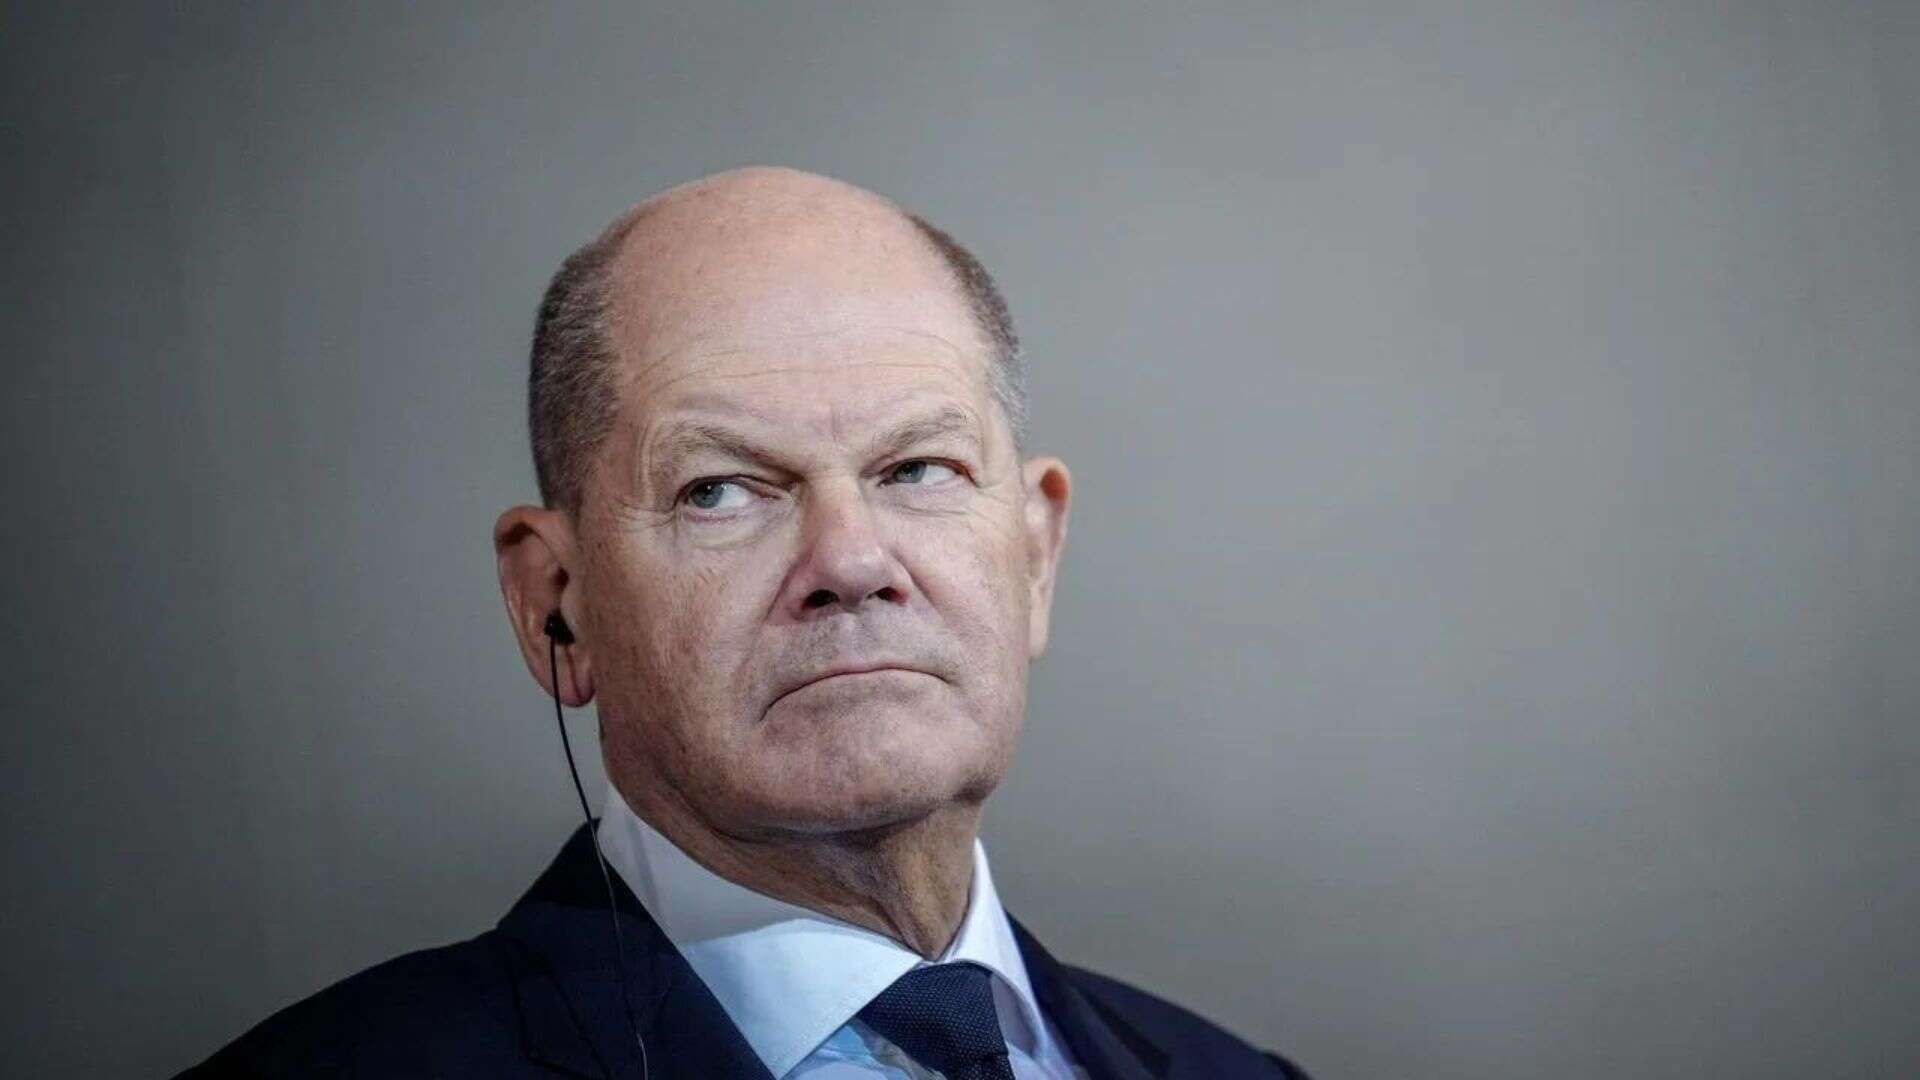 German Chancellor Olaf Scholz To Attend Ukraine Peace Summit